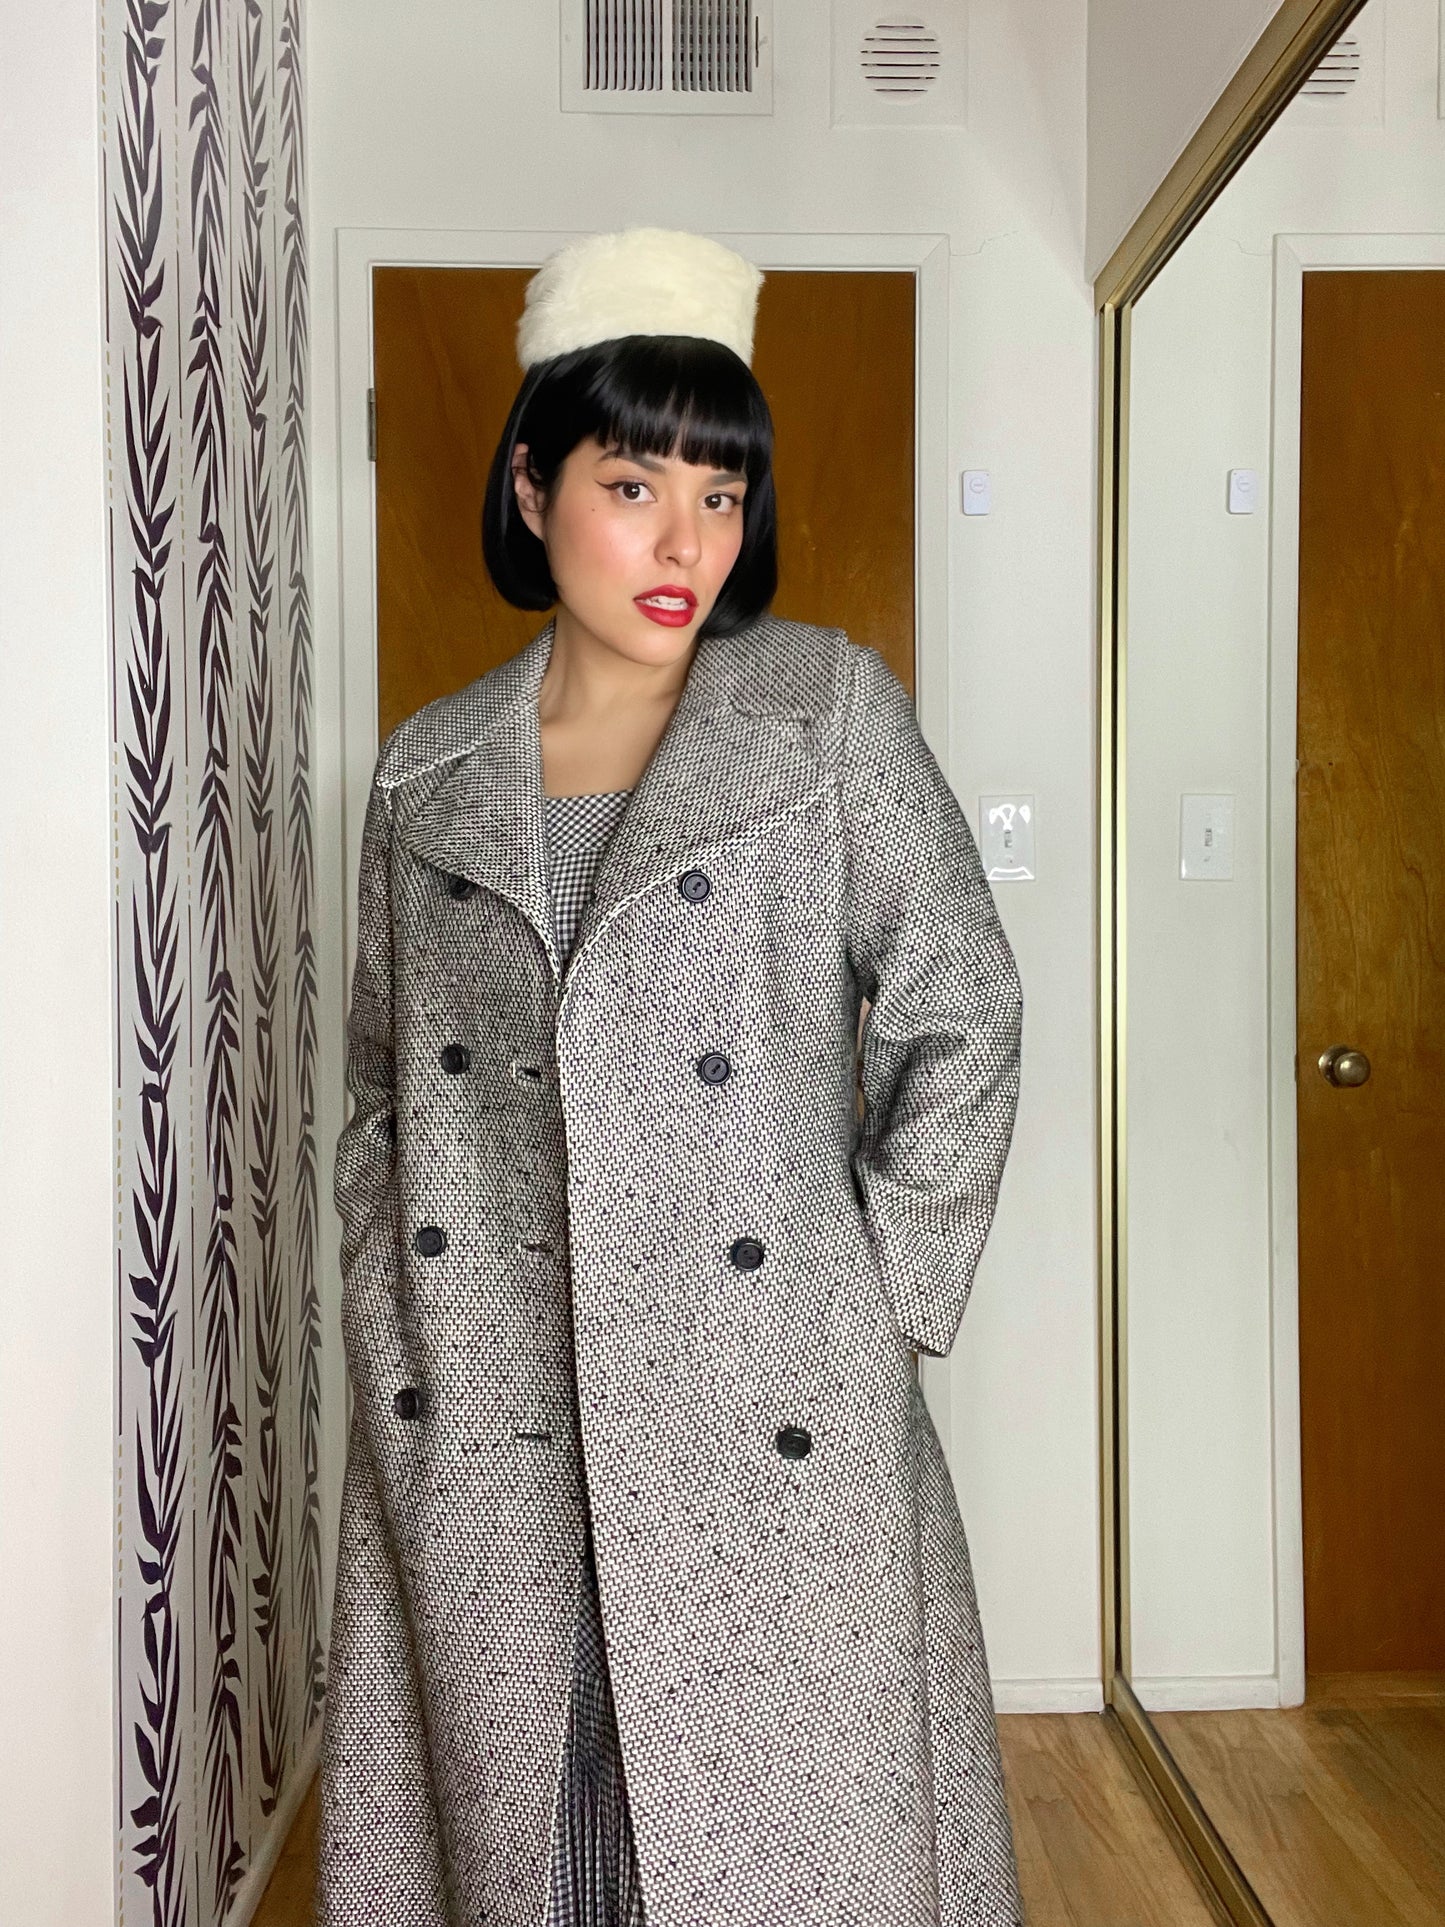 Vintage 50s 60s Black and White Woven Double Breasted Coat Best Fits Sizes XS-S, Possibly M